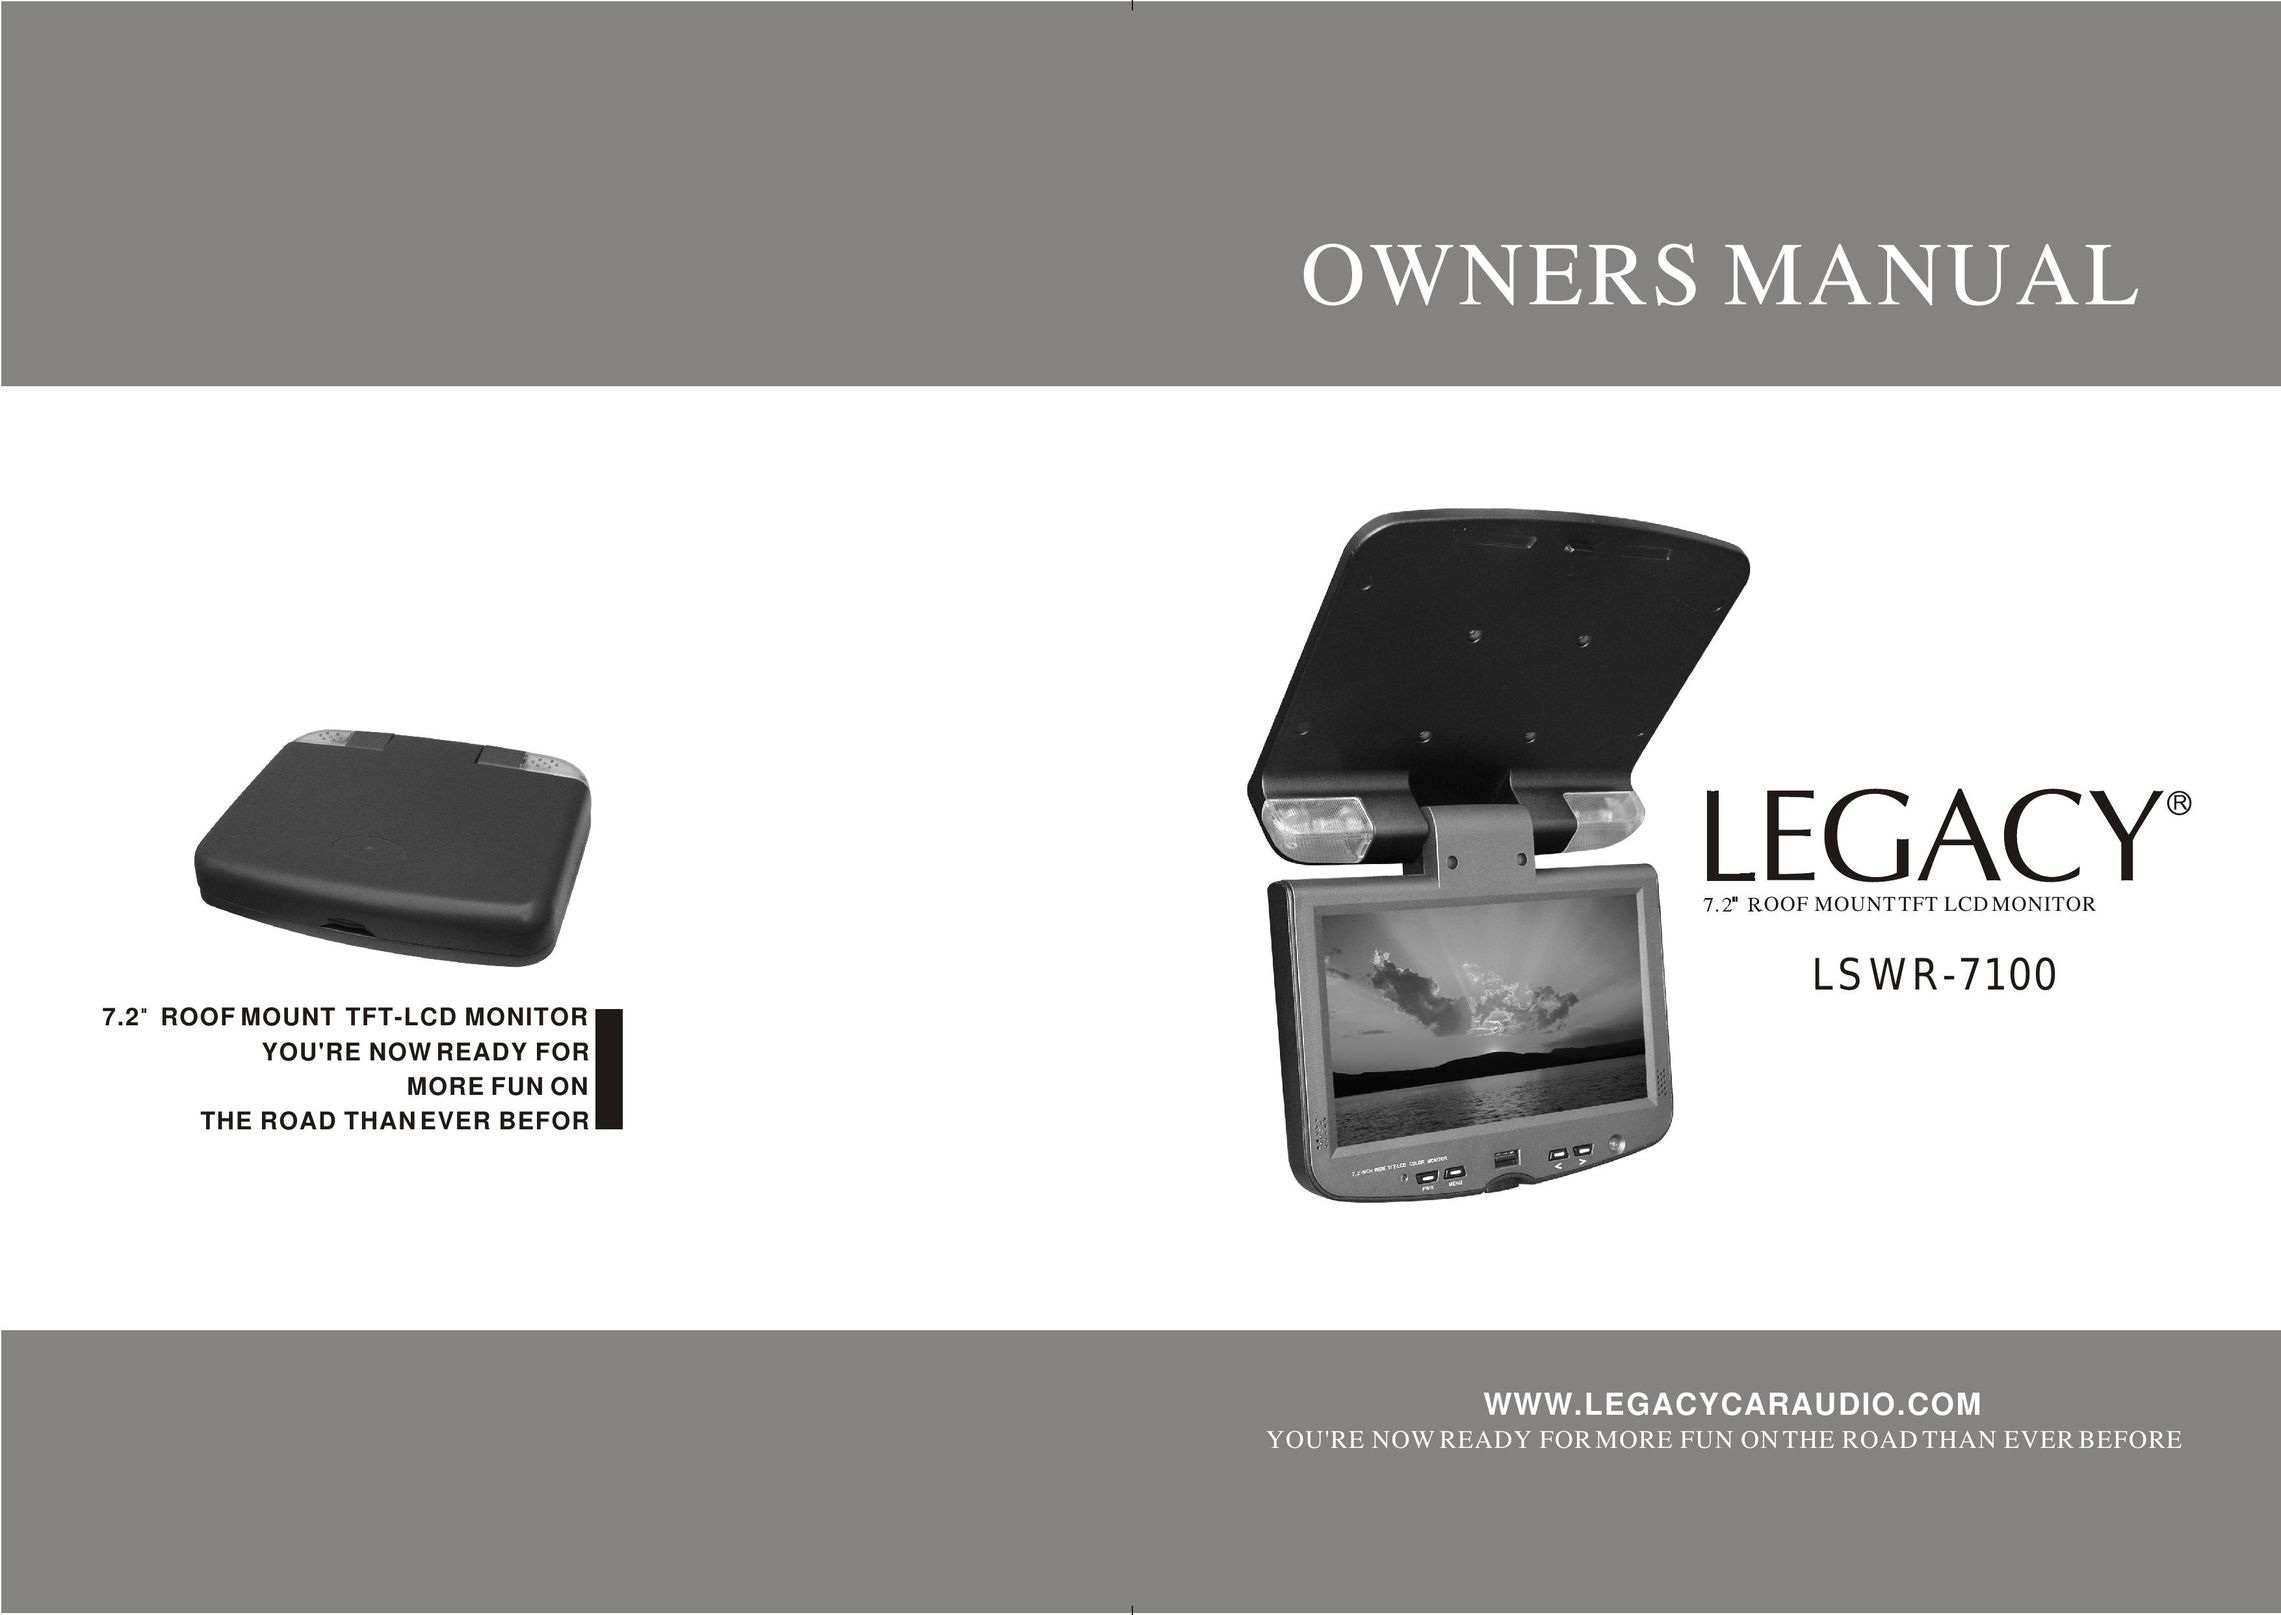 Legacy Car Audio LSWR-7100 Car Video System User Manual